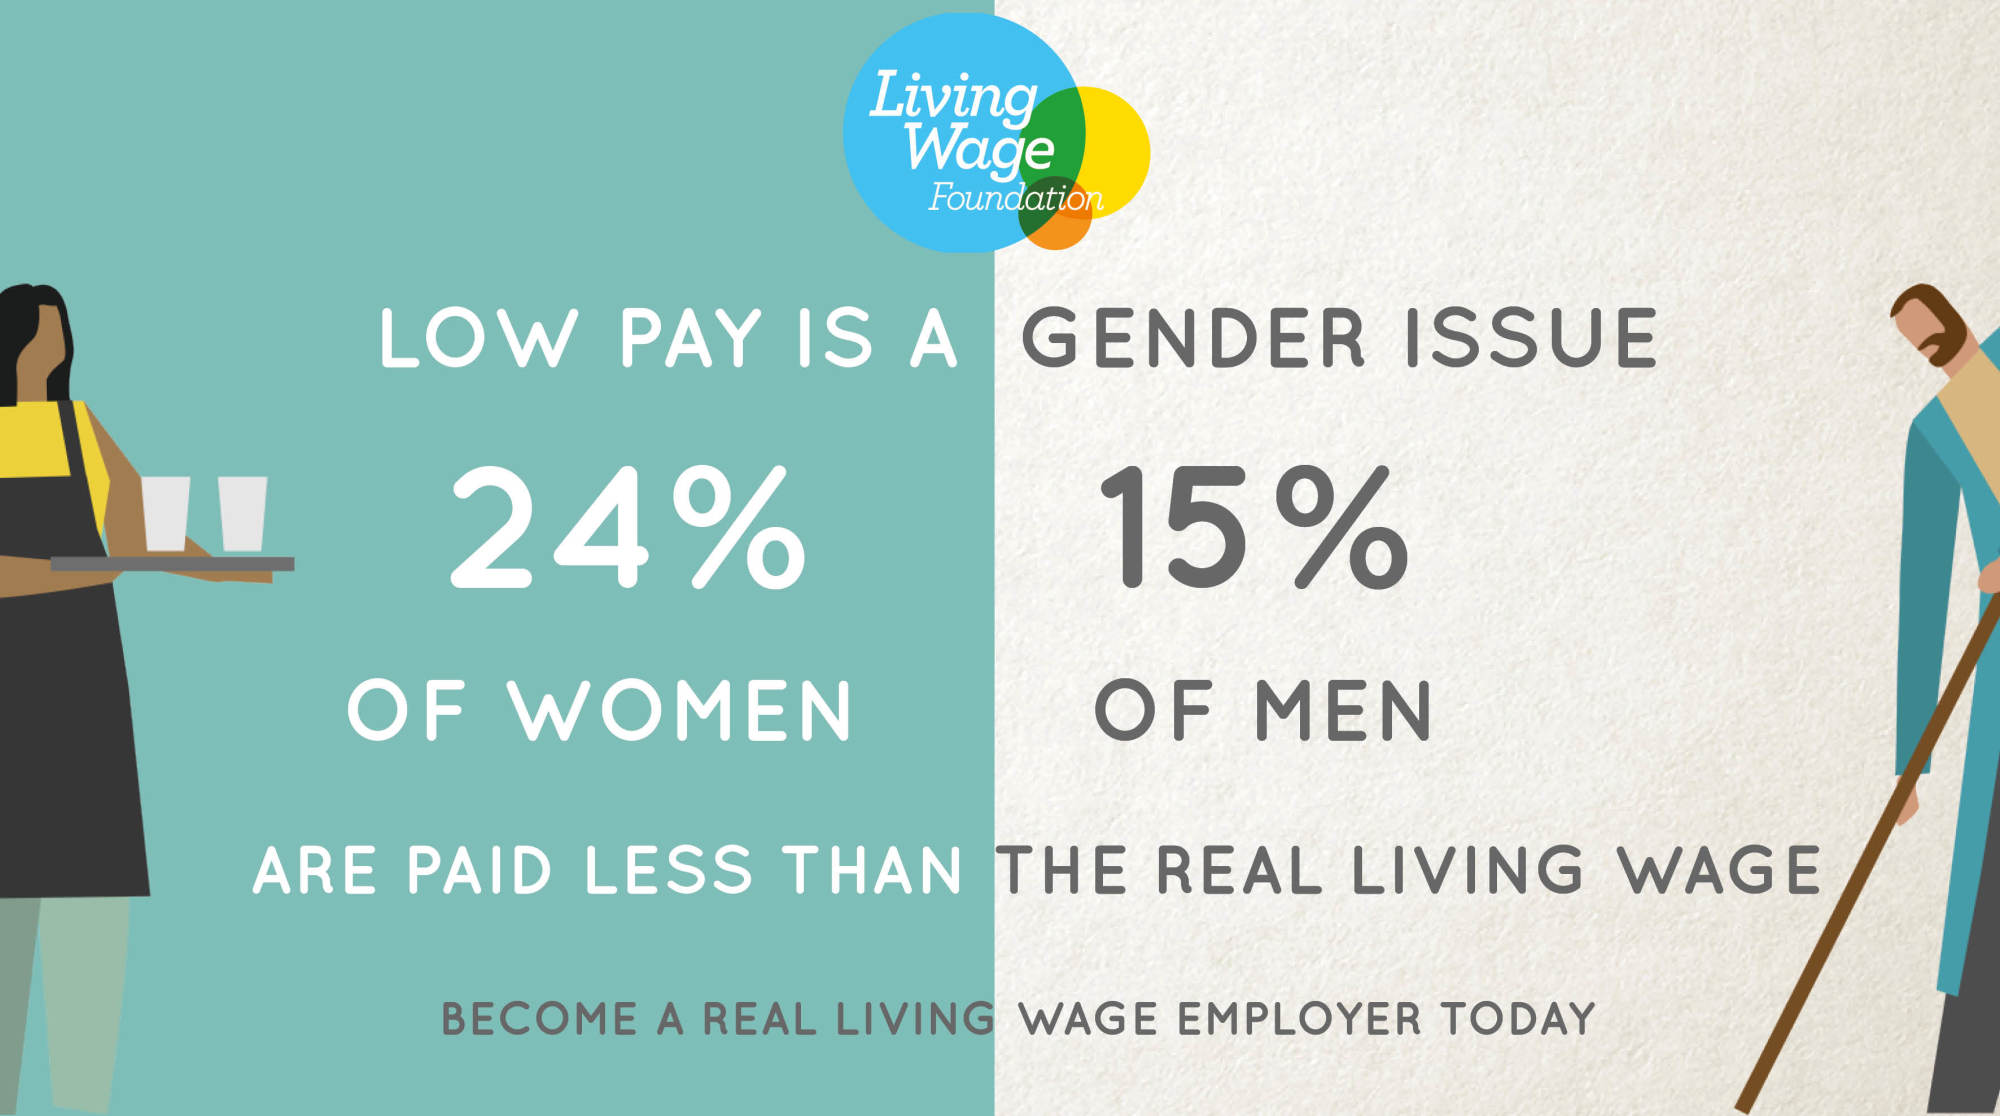 KPMG analysis has shown there has been a drop in the number of people being paid below the Real Living Wage